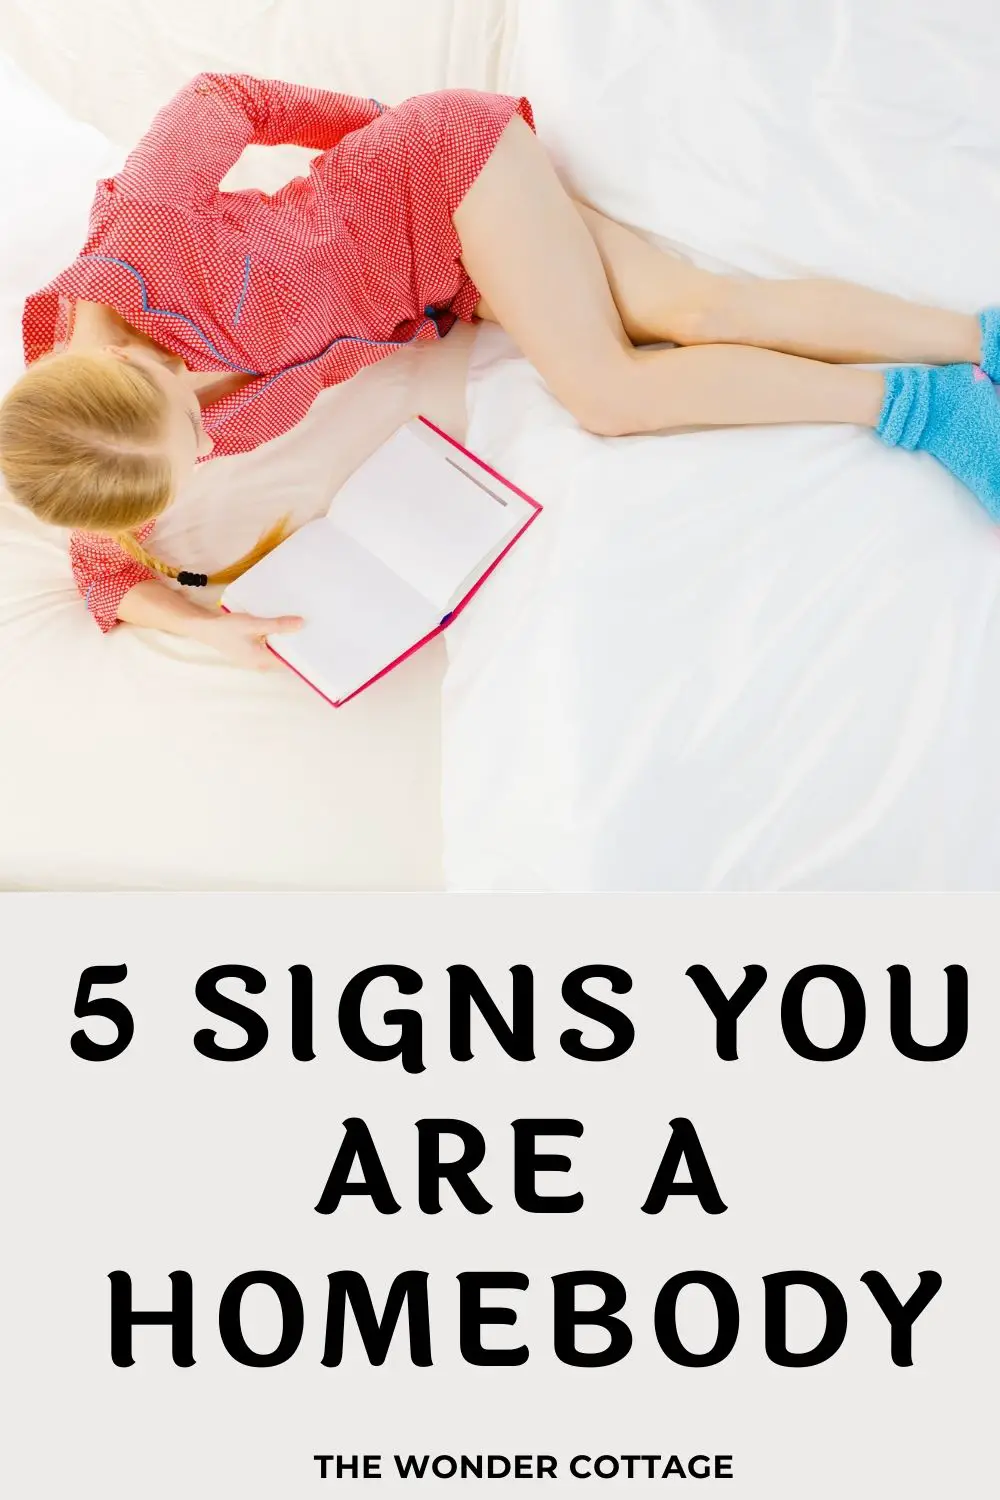 5 signs you are a homebody